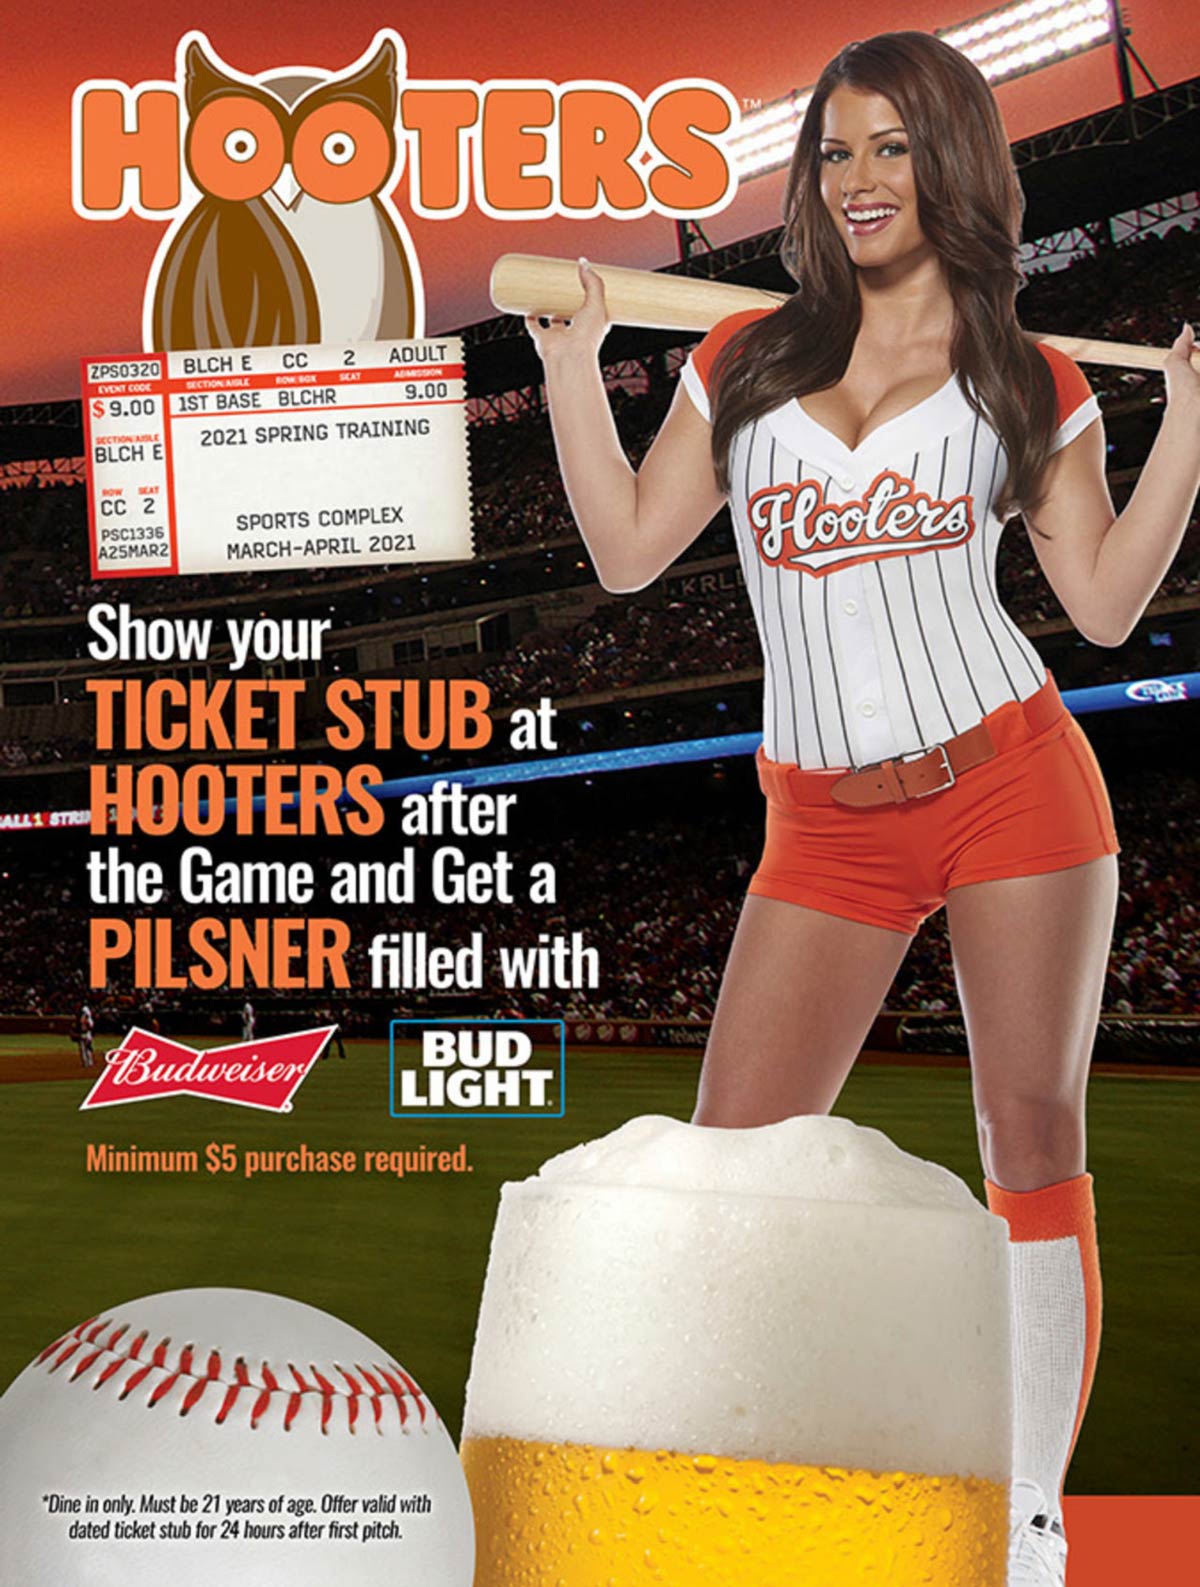 Hooters restaurants Coupon  Ticket stubs get a free pilsner post-game at Hooters restaurants #hooters 